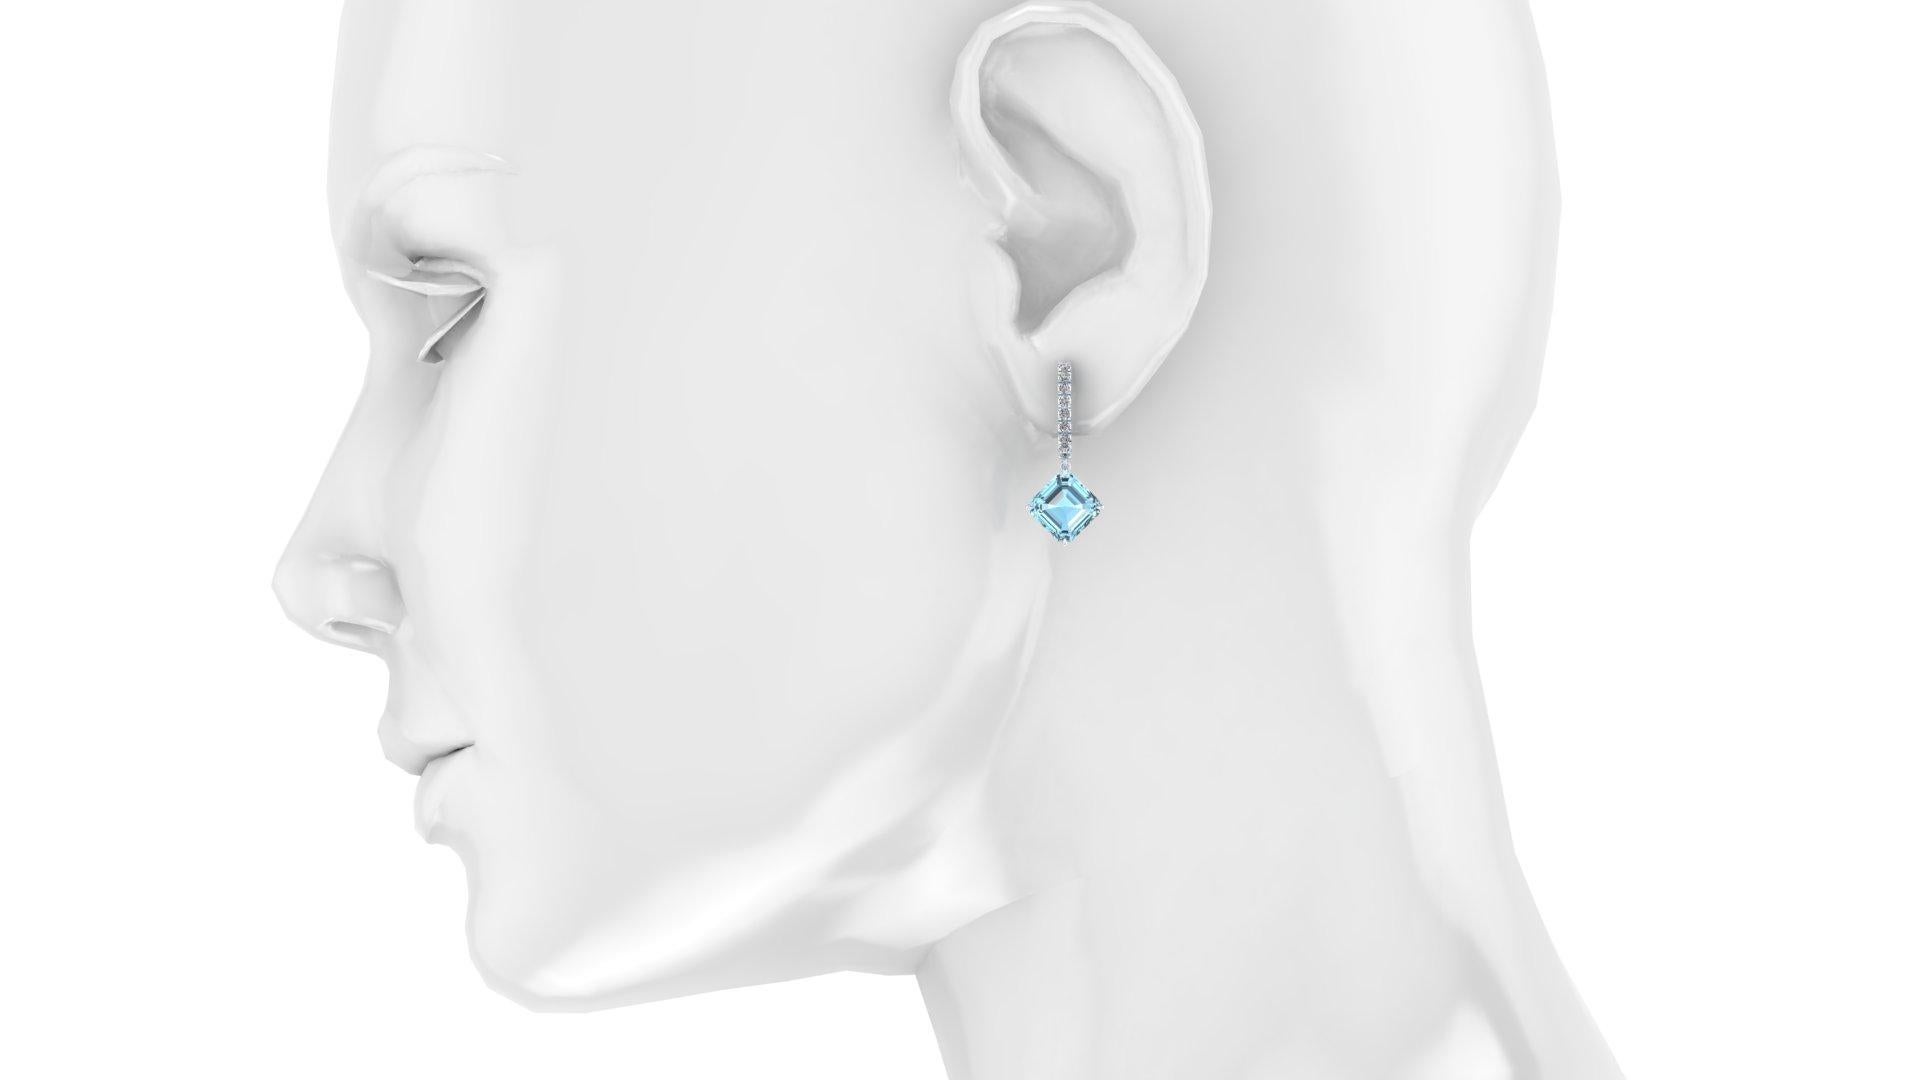 4.62 Carats Ascher cut Aquamarine and Diamonds Platinum Earrings, diamonds brilliant cut for an approximate total carat weight of 0.28ct of G/H color, VS clarity, set in Platinum 950 drop dangling earrings
Push back self locking.   Complimentary